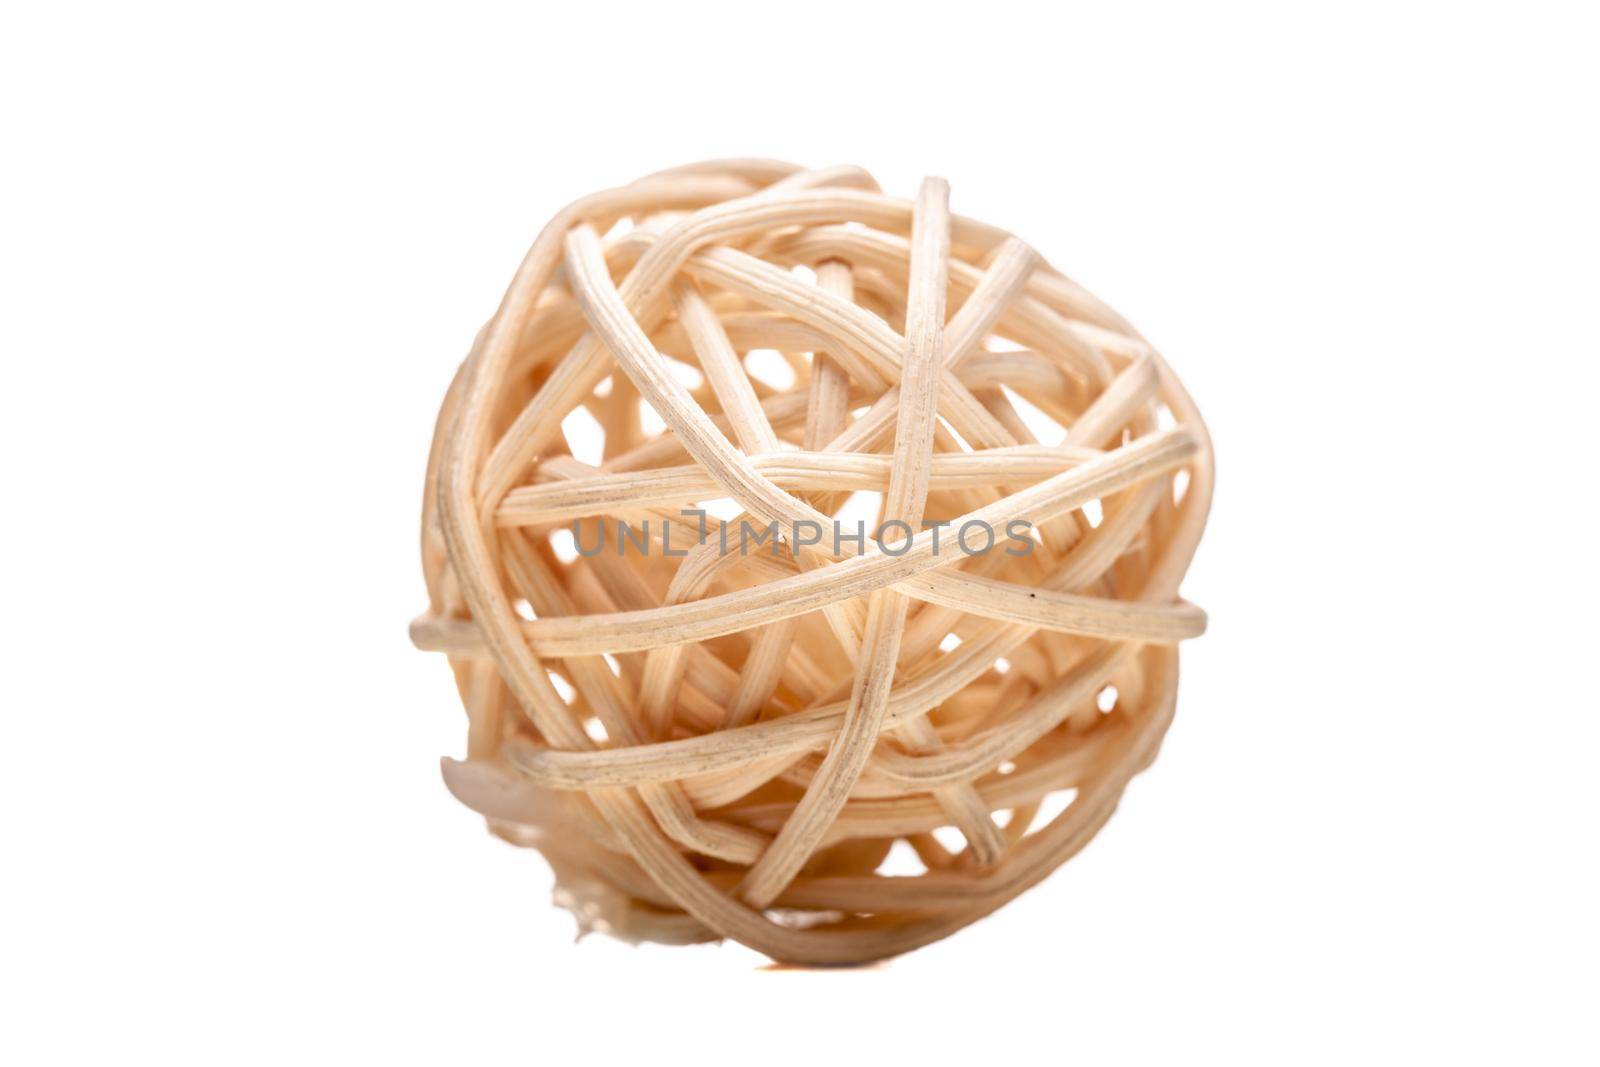 small bamboo ball against white background by kokimk